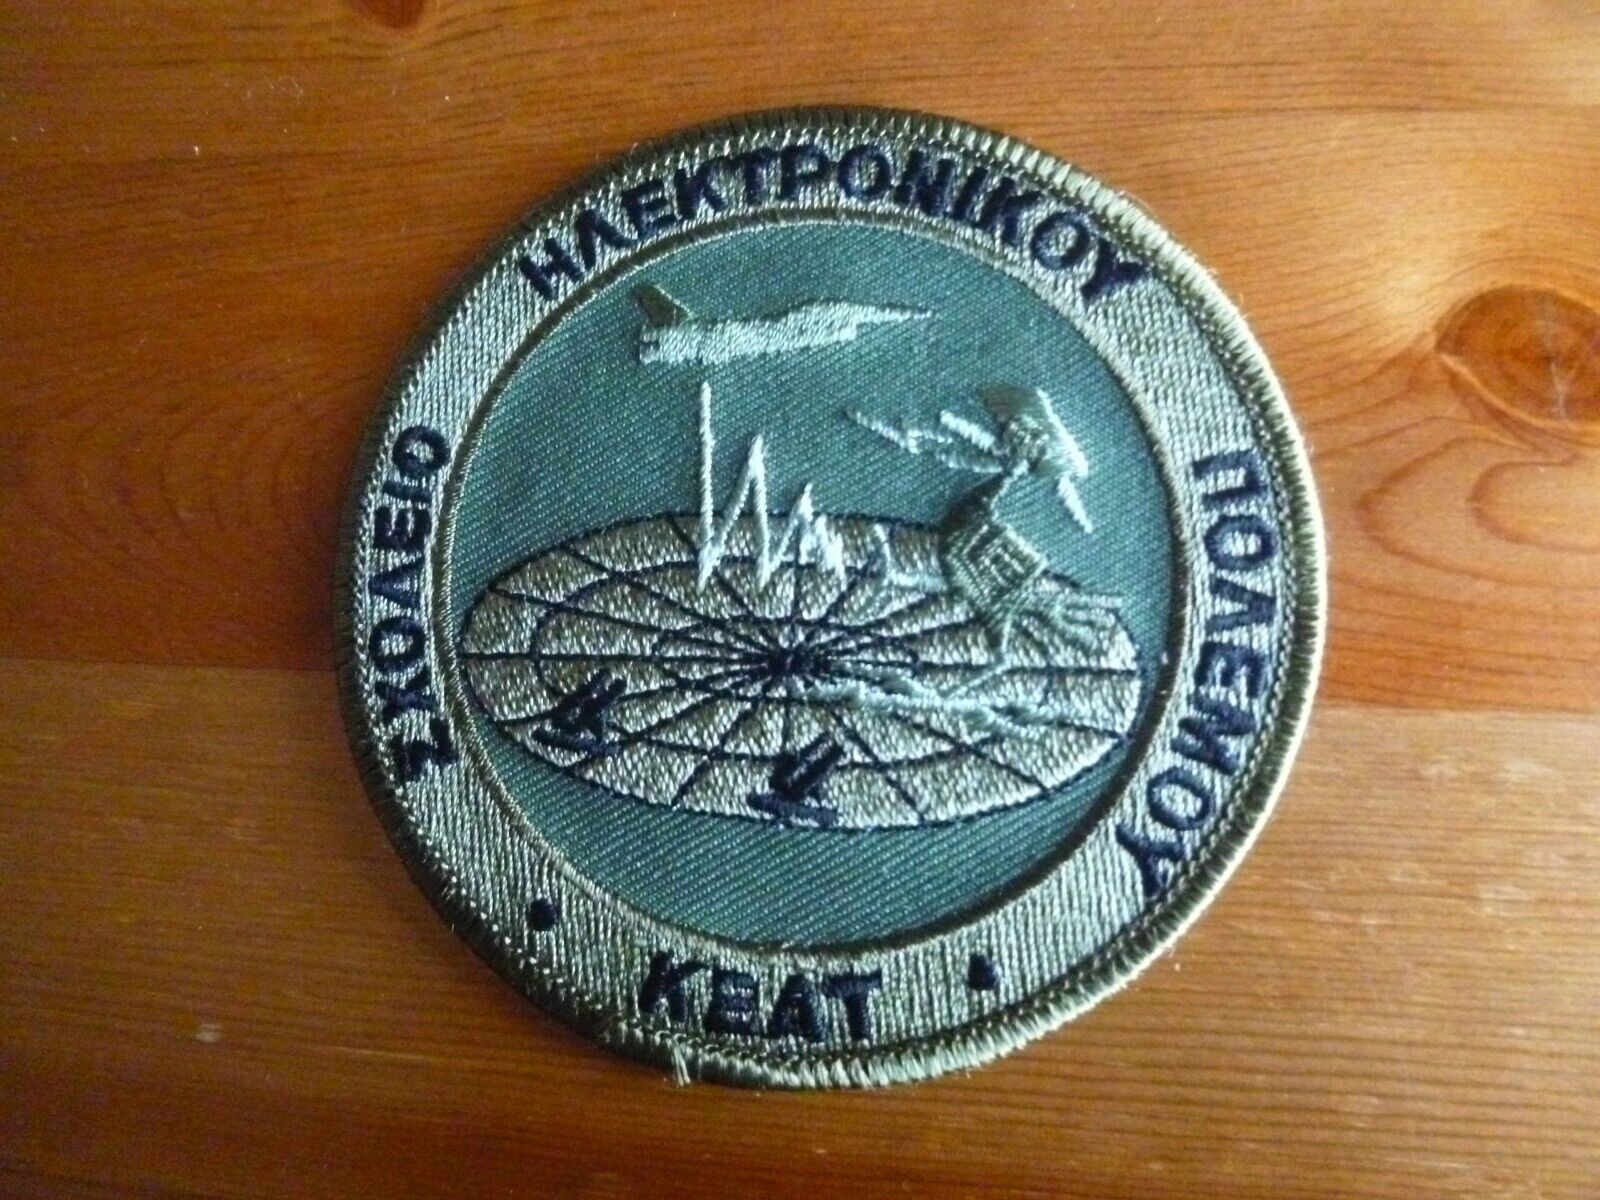 HAF GREECE F-16 Falcon Fighter Keat Haektponikoy PATCH Fighter Squadron HELLENIC